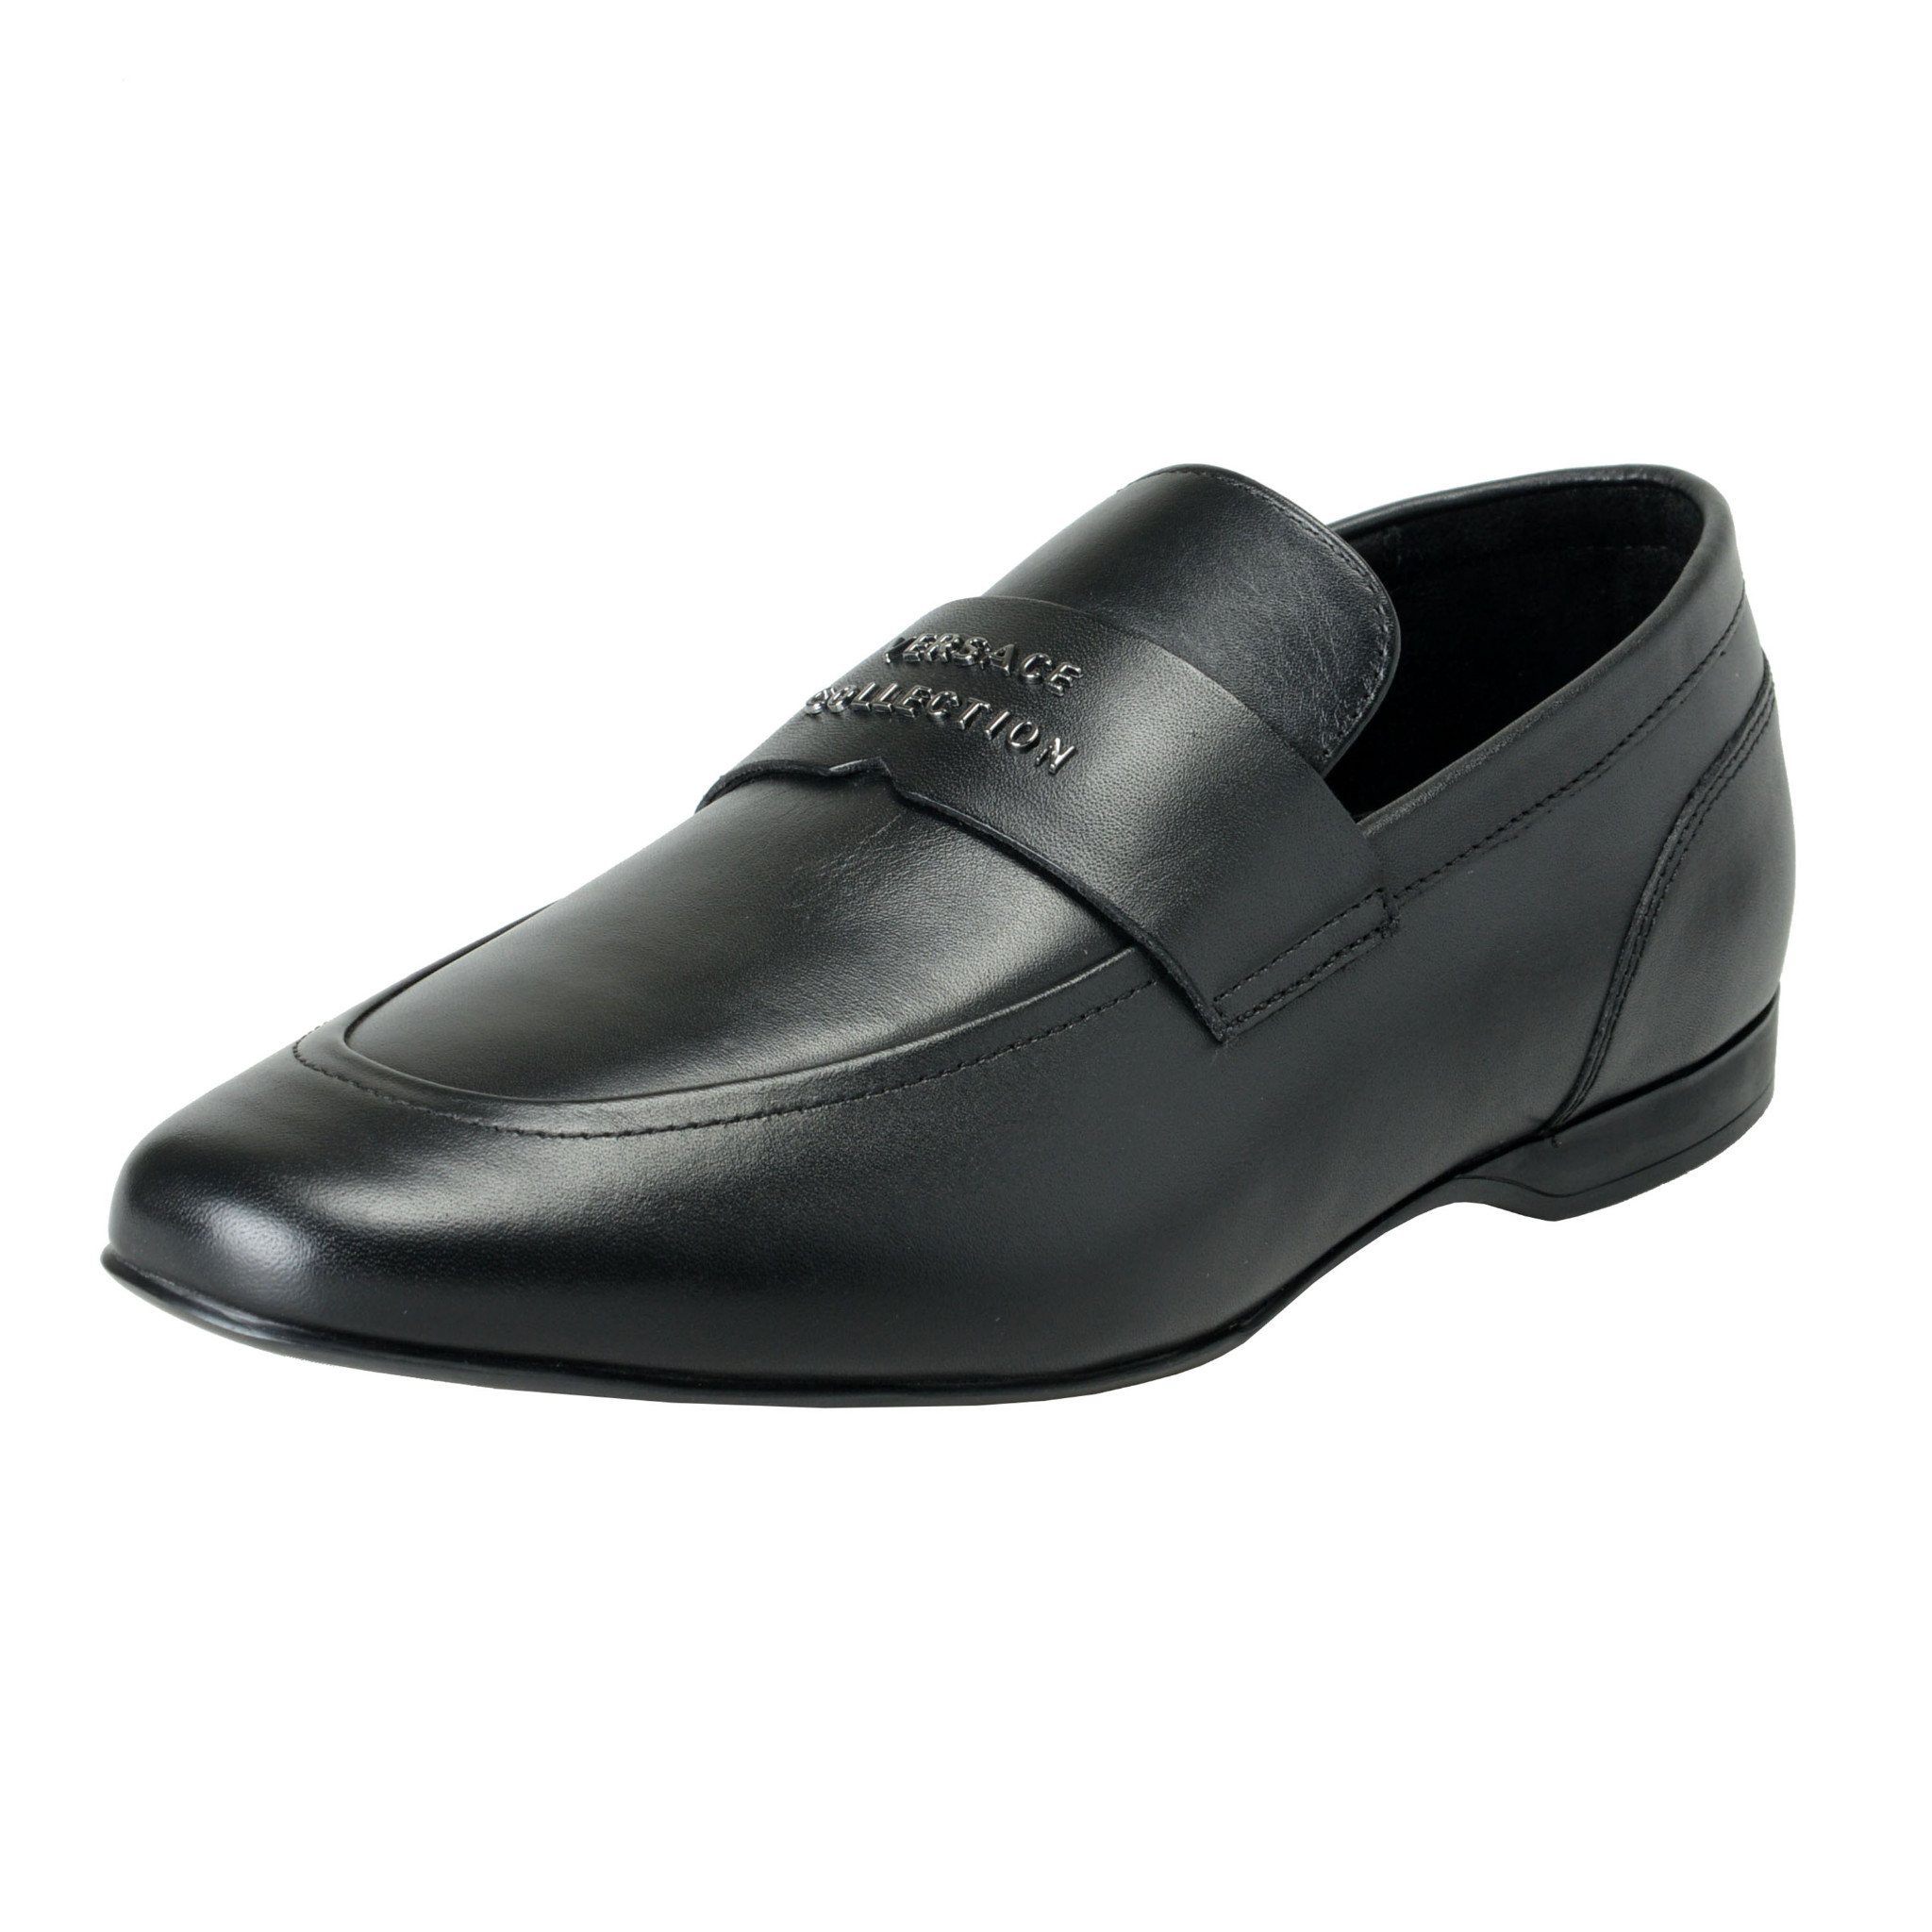 Black Leather Loafers Slip On Shoes 6 